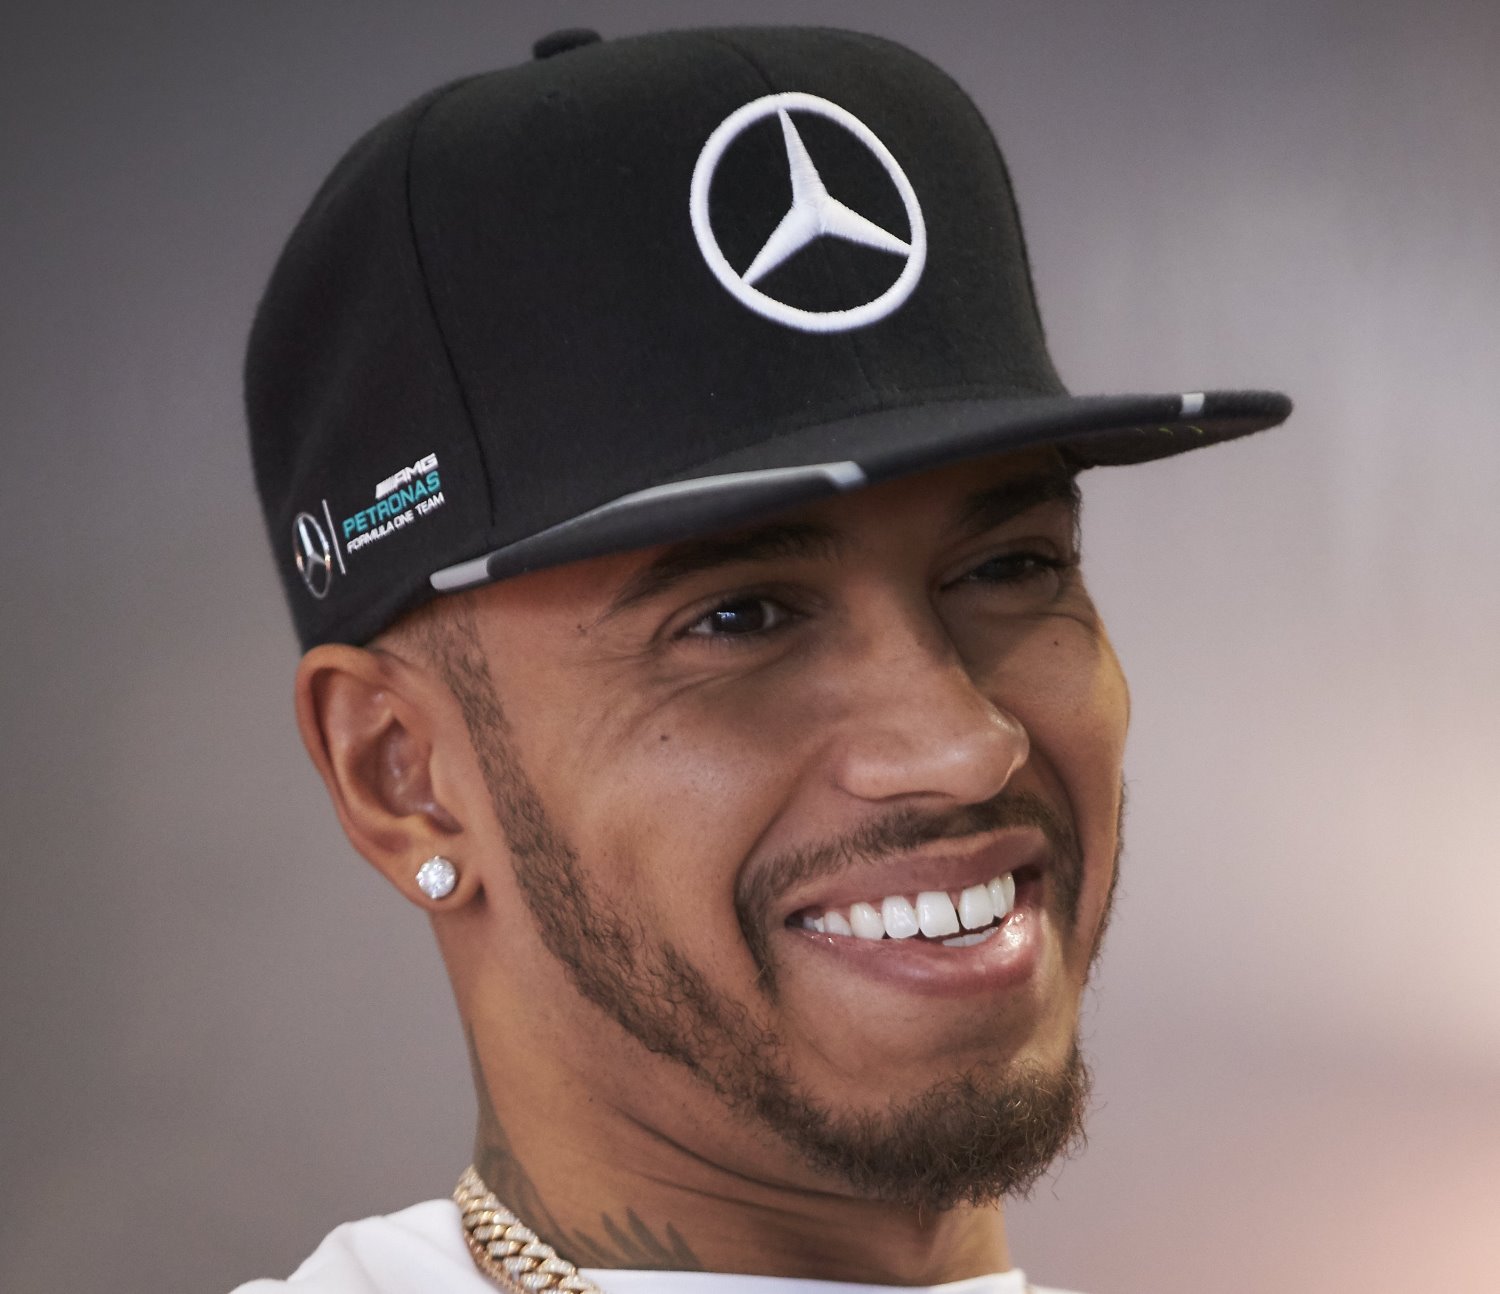 Hamilton knows Mercedes has plenty in hand. If Ferrari gets close the Mercedes engineers just beam another command to their cars